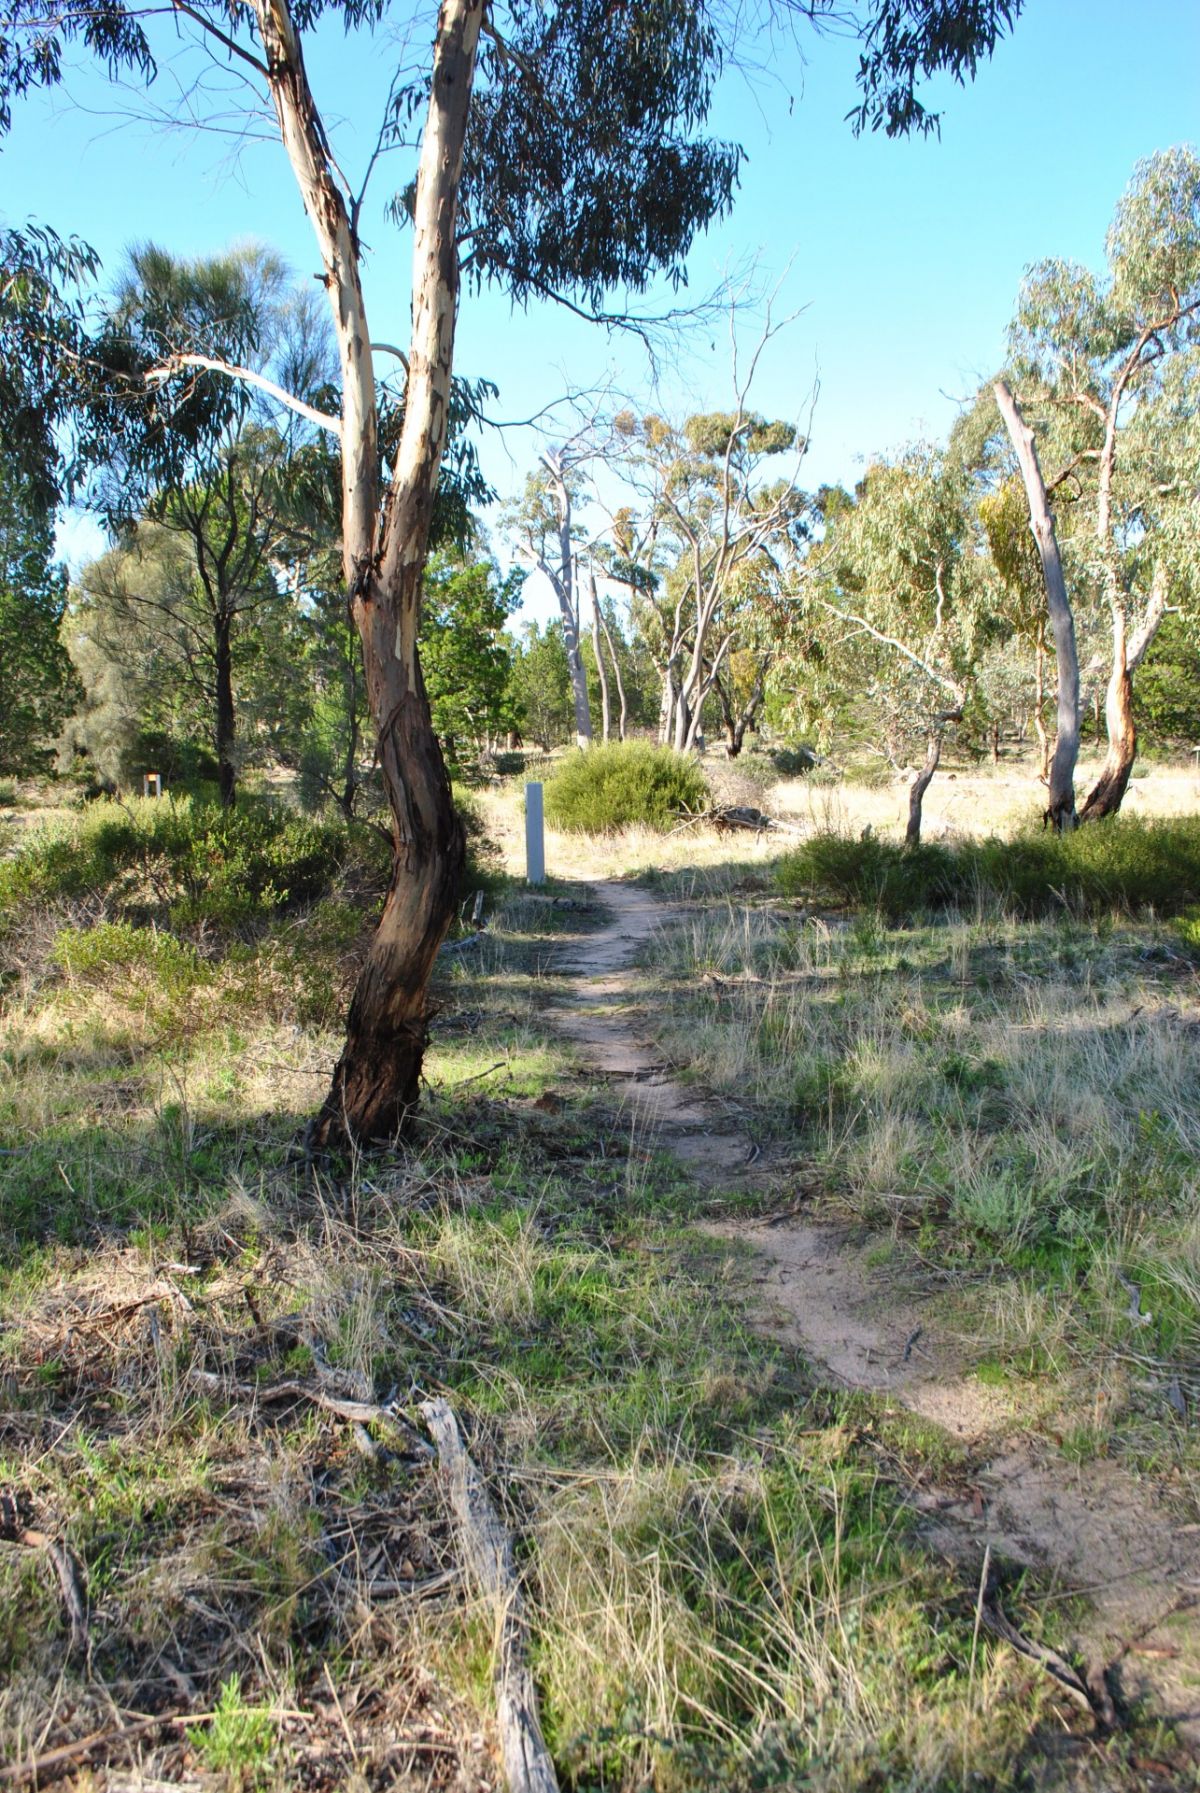 A narrow path through a grassy field with trees either side